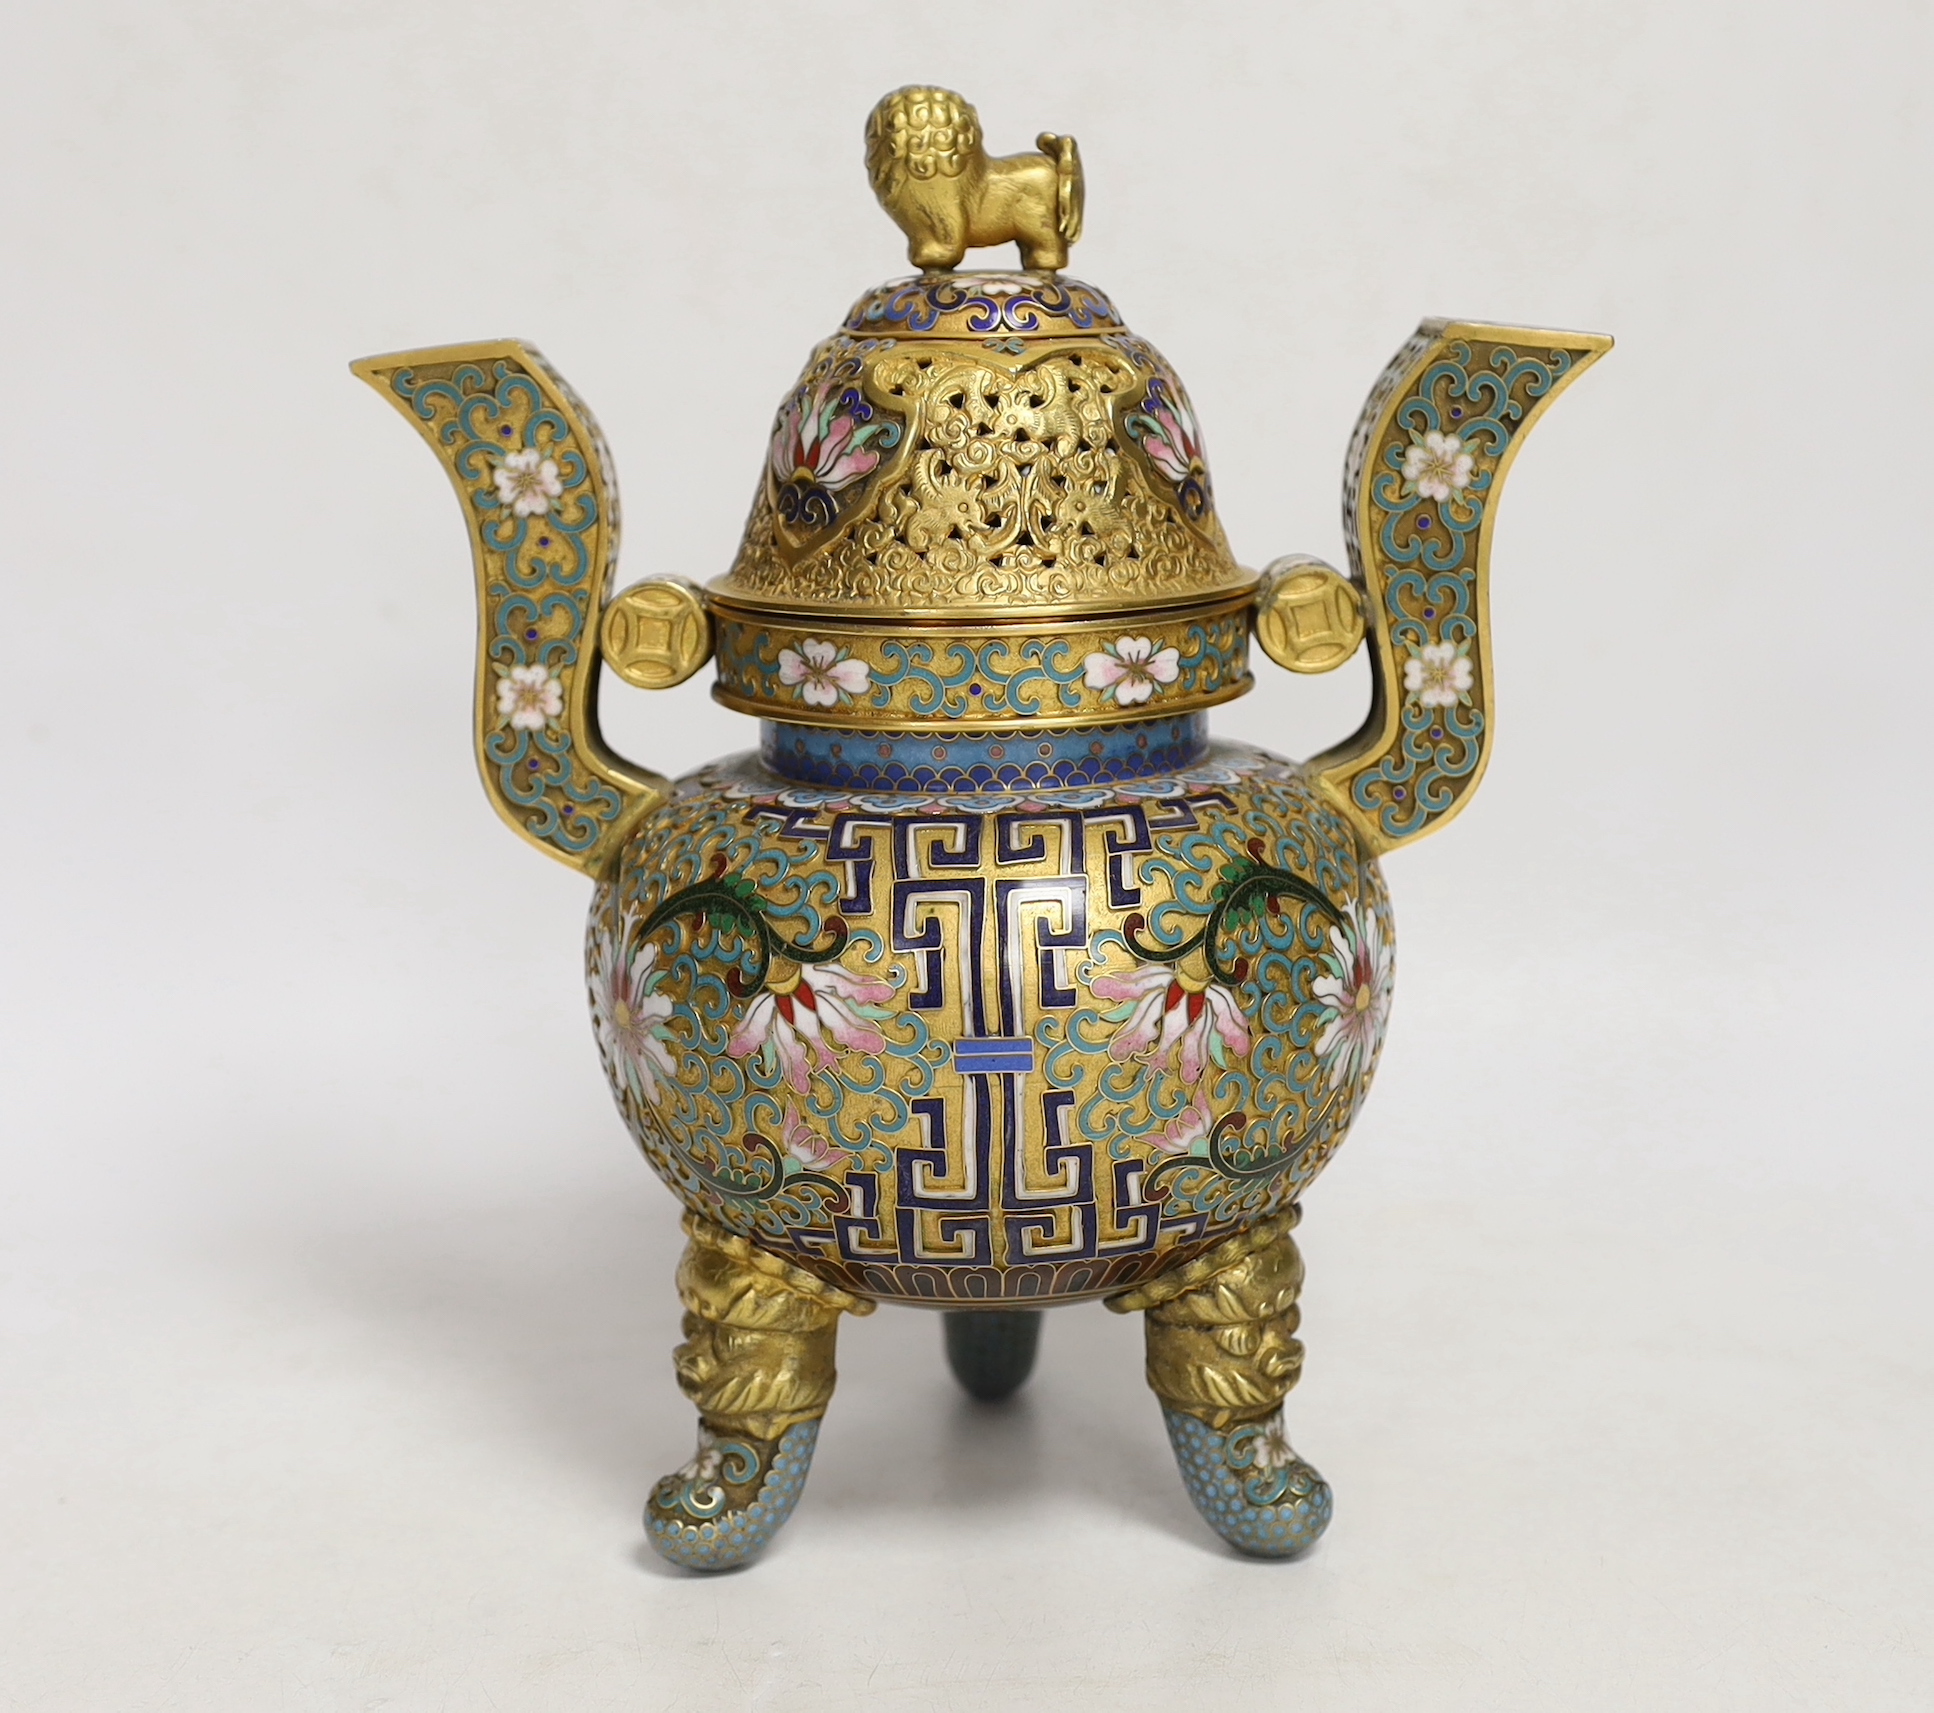 A Chinese cloisonné enamel tripod censer and cover, 22cm high including cover - Image 3 of 5